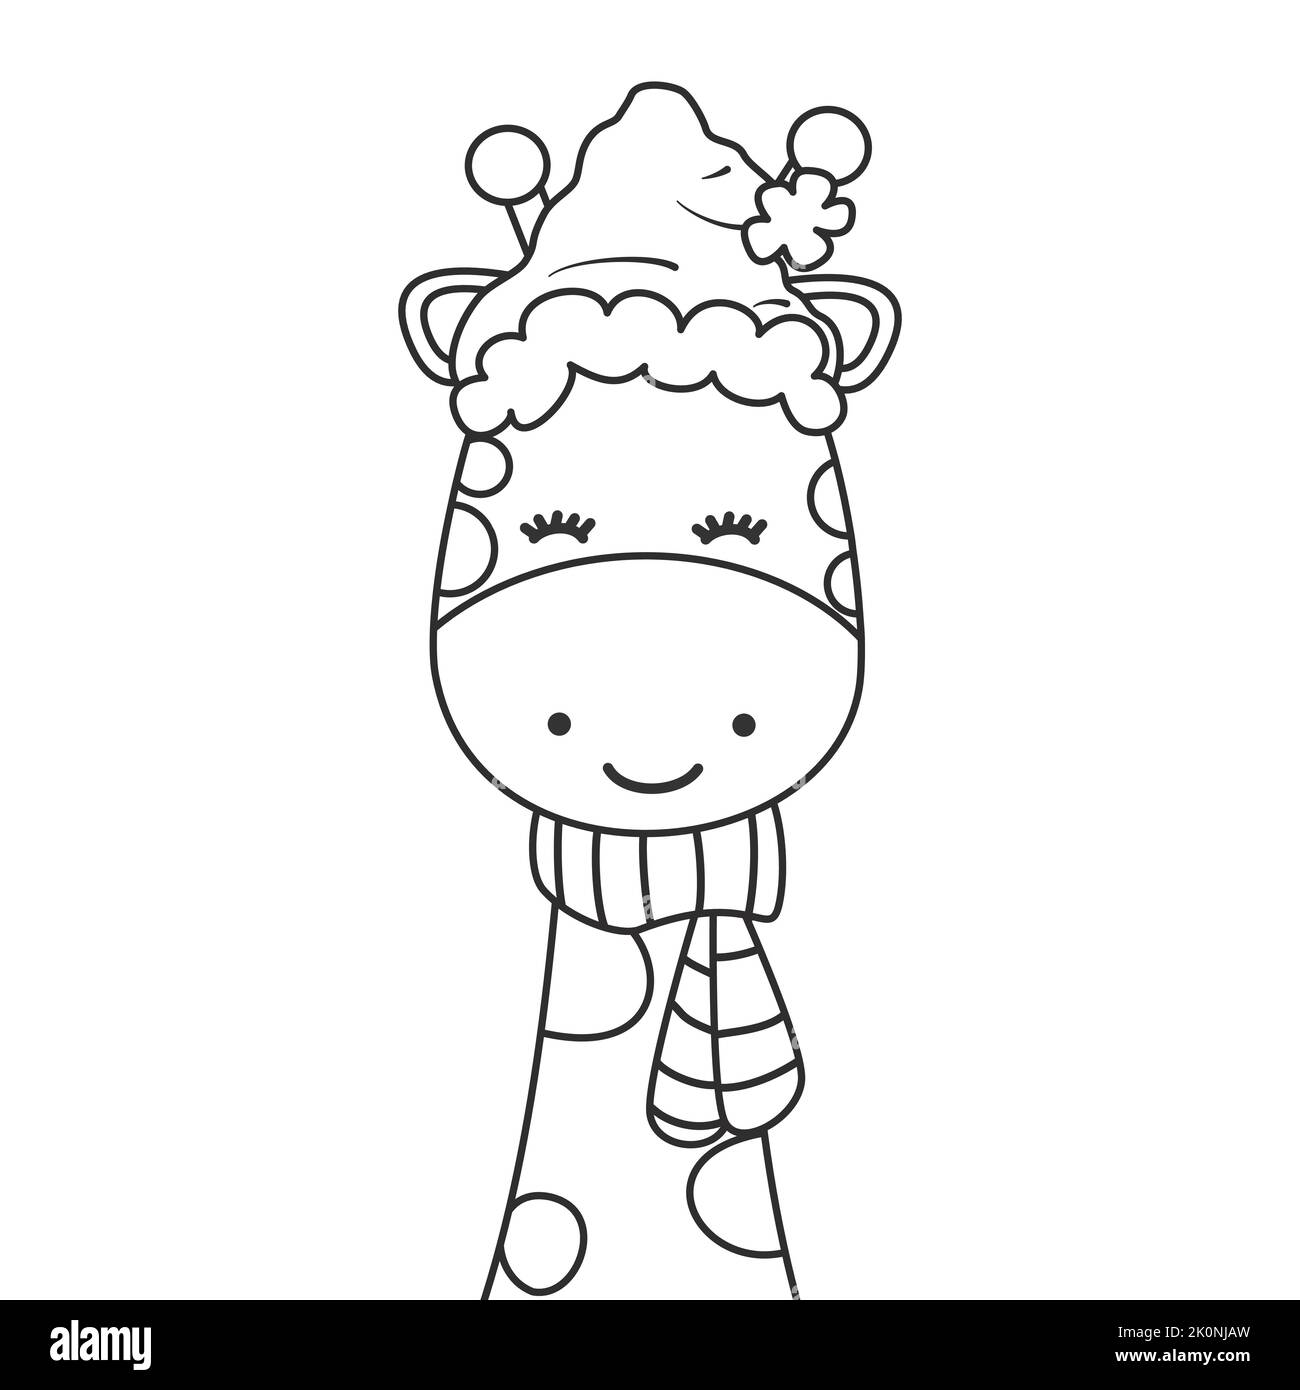 cute cartoon character black and white giraffe with santa claus hat and scarf funny vector illustration for christmas holiday coloring art Stock Vector